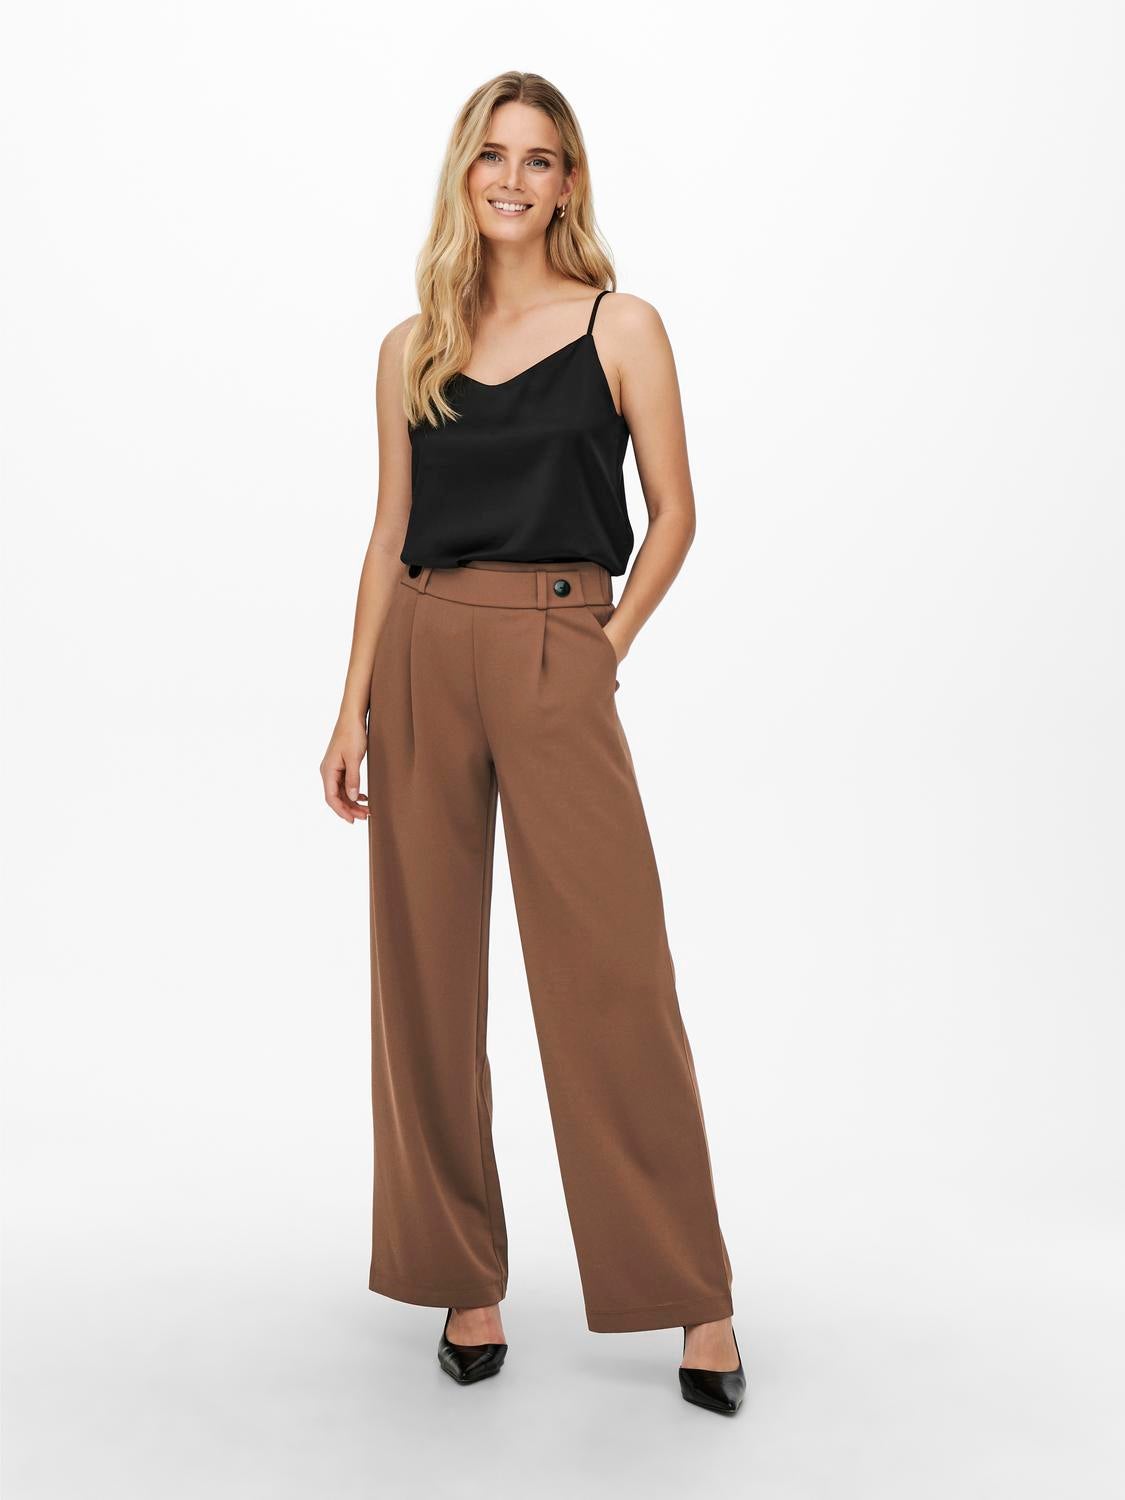 What to wear with palazzo pants (Complete Guide)